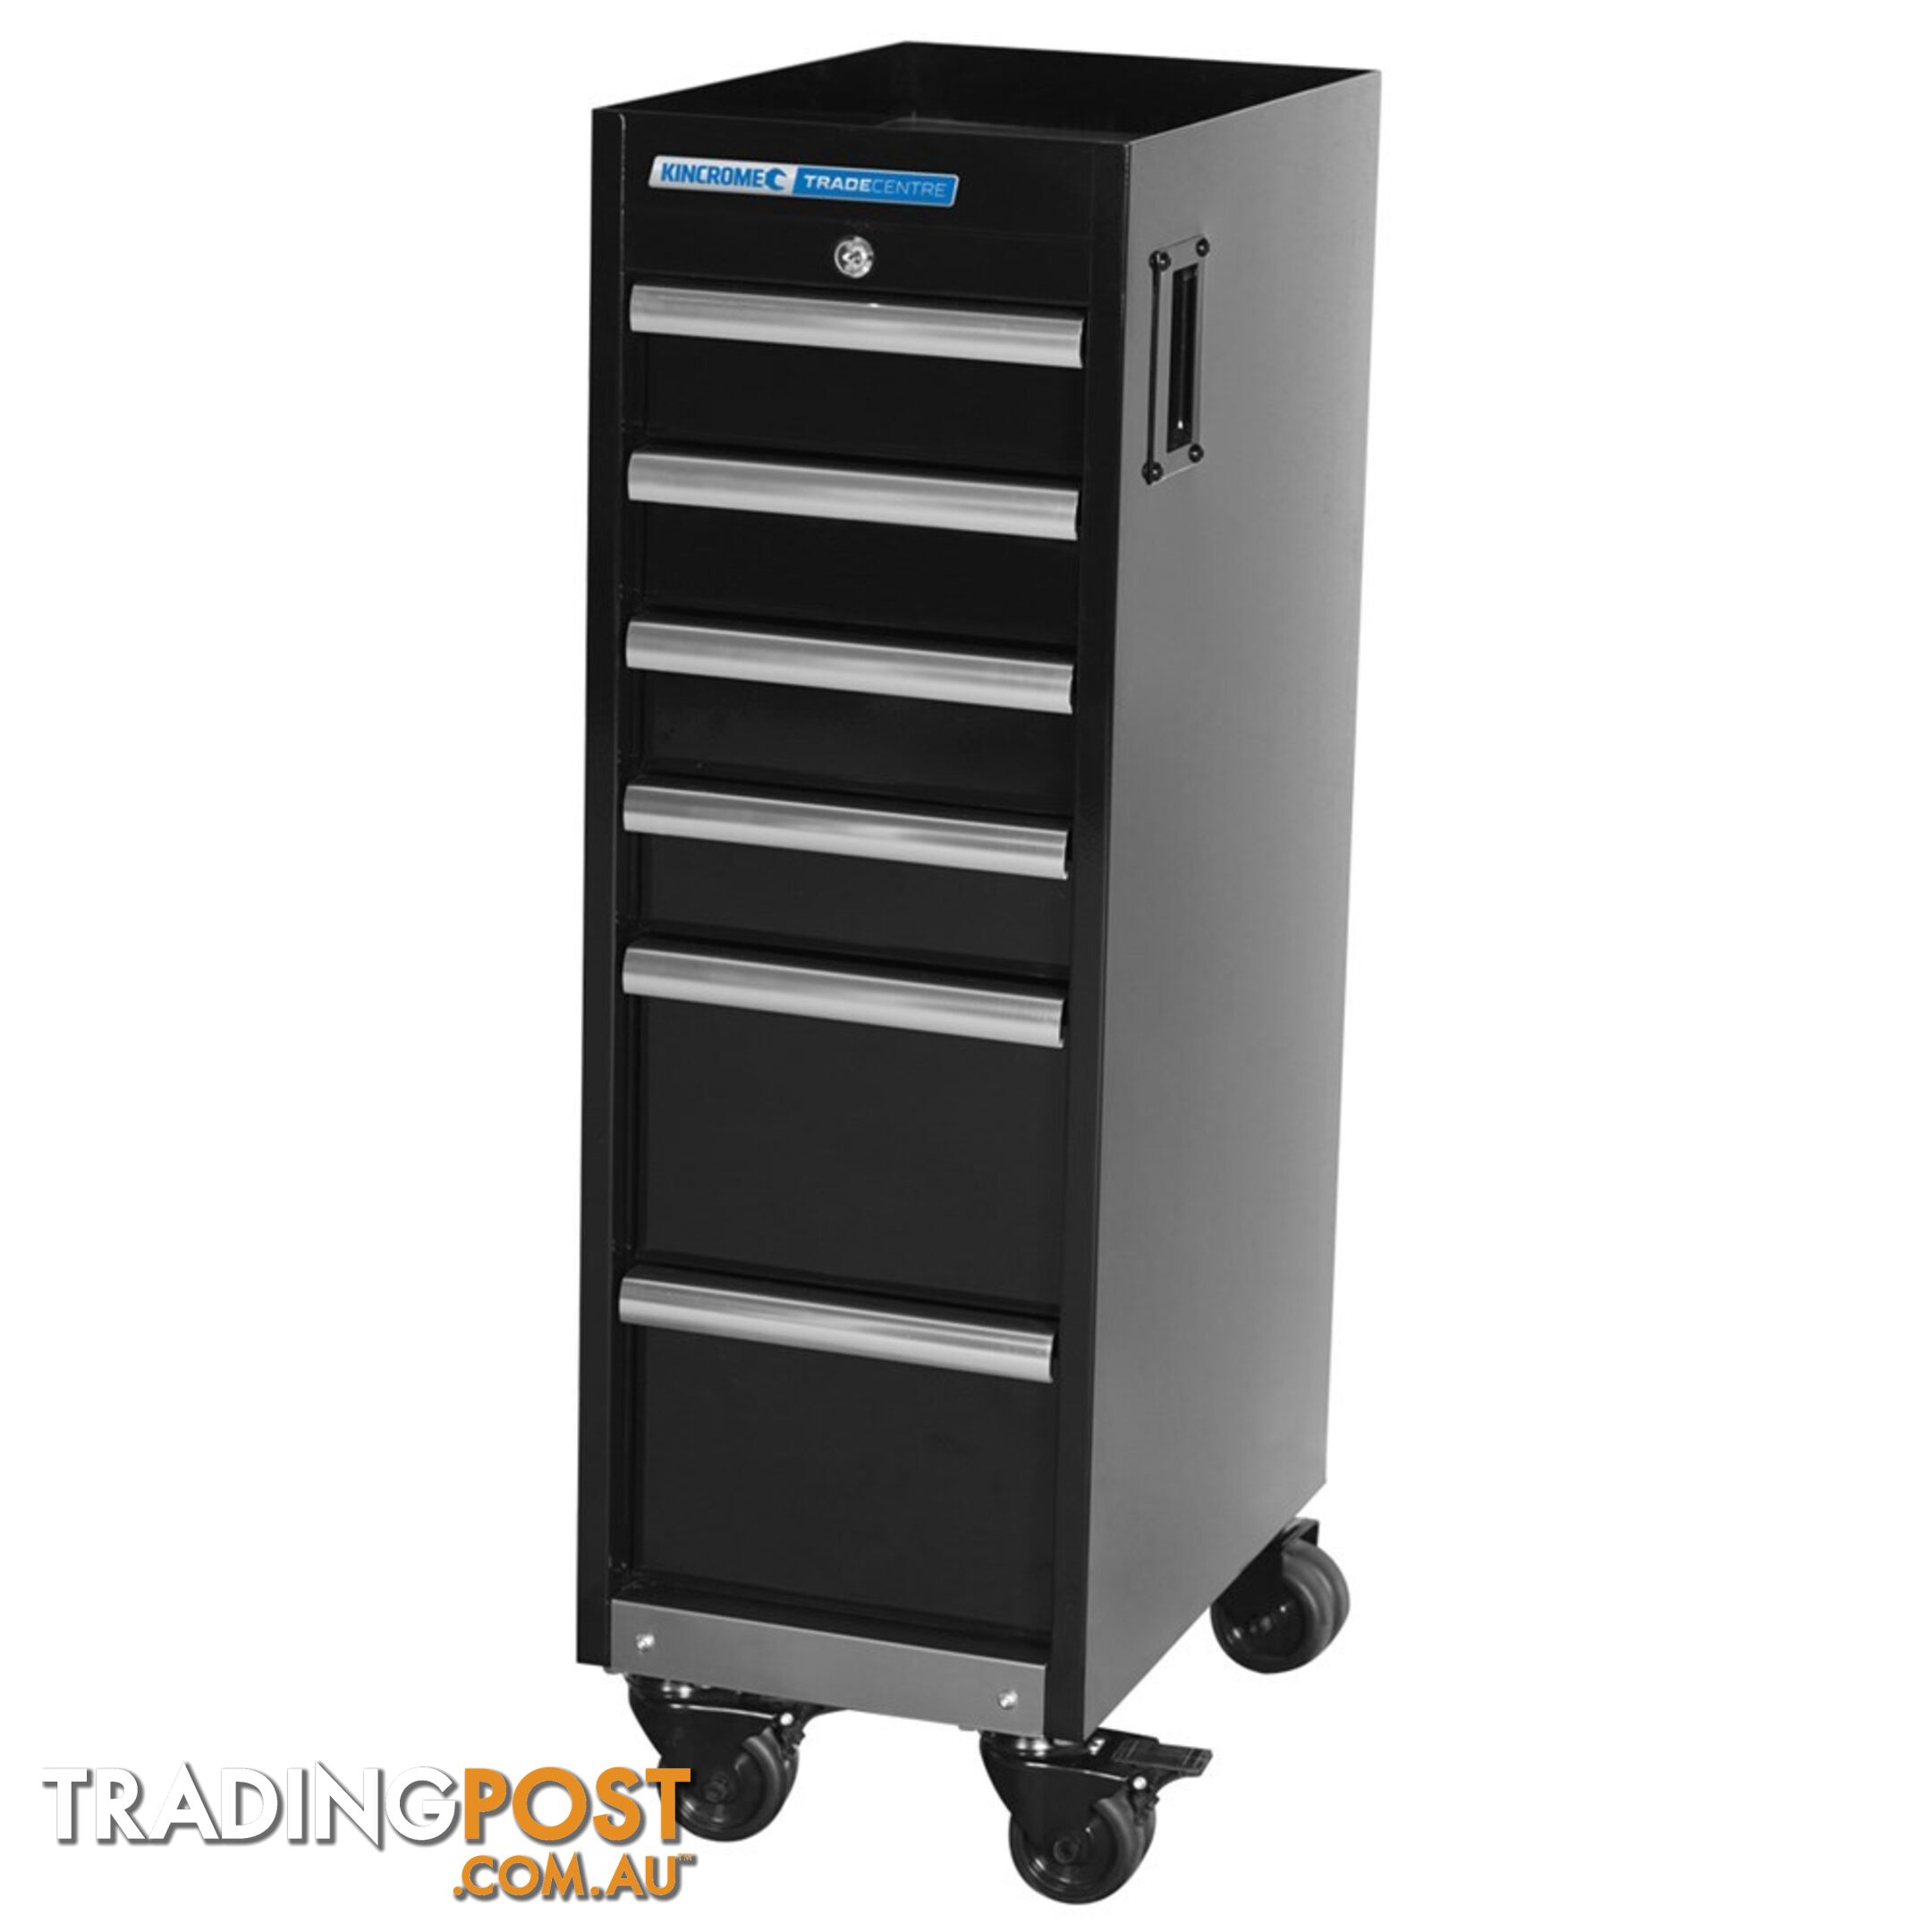 TRADE CENTRE Mobile Service Trolley 6 Drawer (Trolley Only) Kincrome K7369